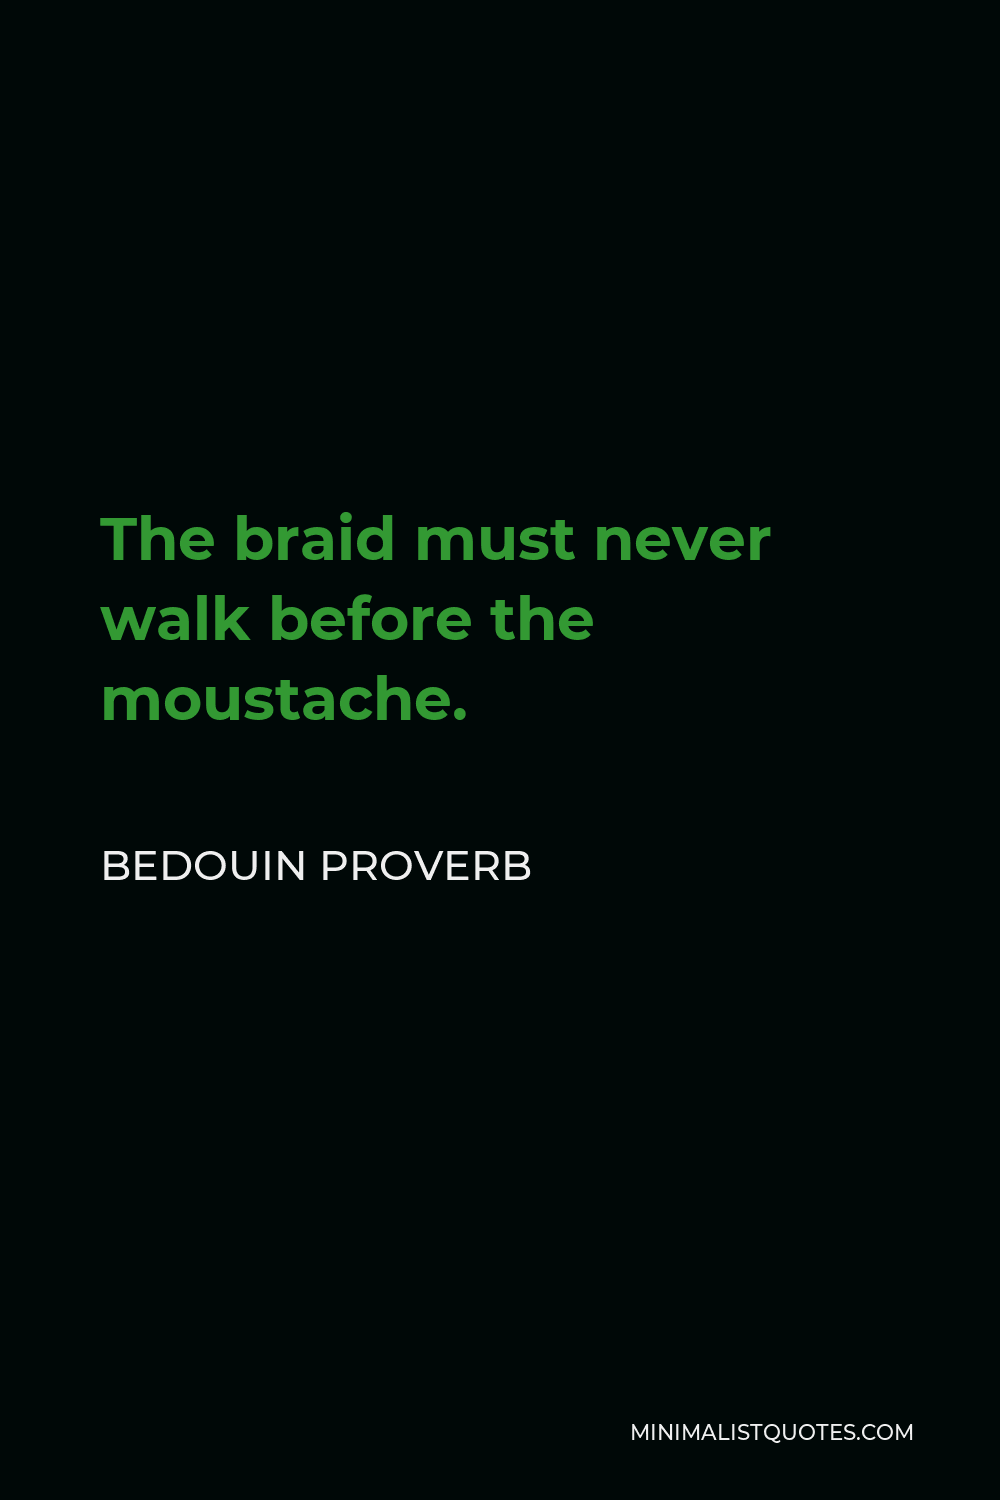 Bedouin Proverb Quote - The braid must never walk before the moustache.